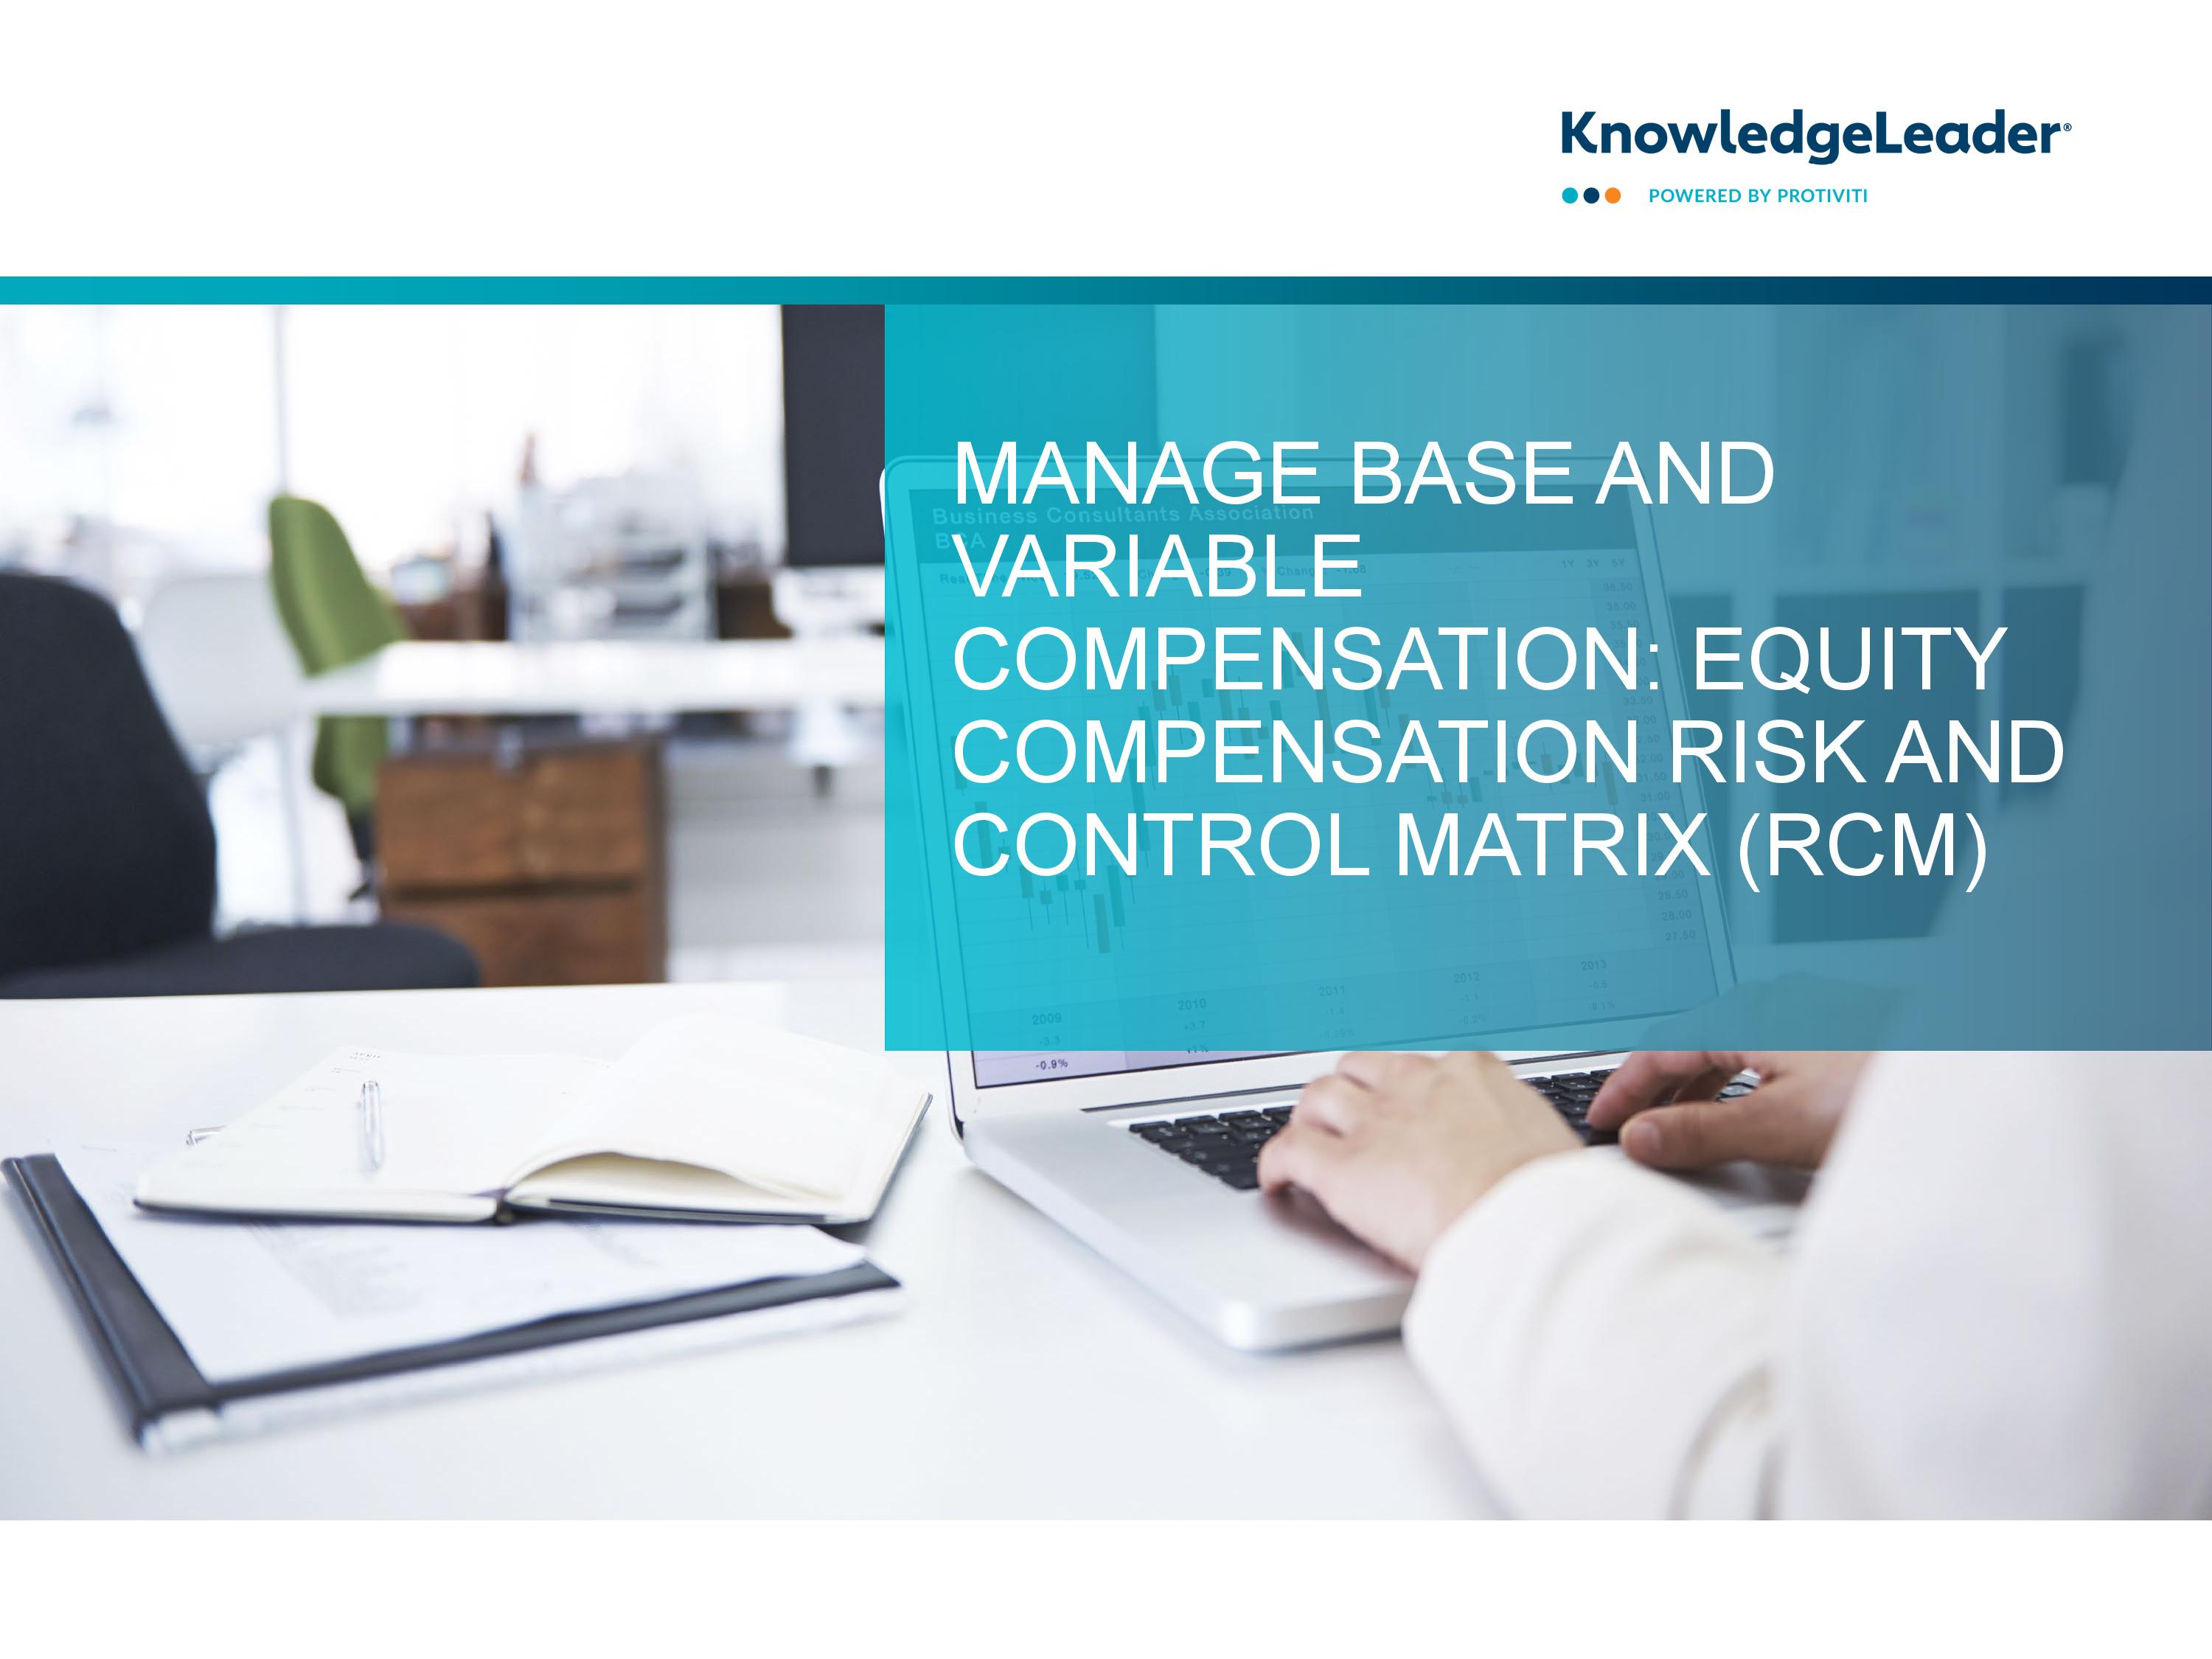 Manage Base and Variable Compensation Equity Compensation Risk and Control Matrix (RCM)